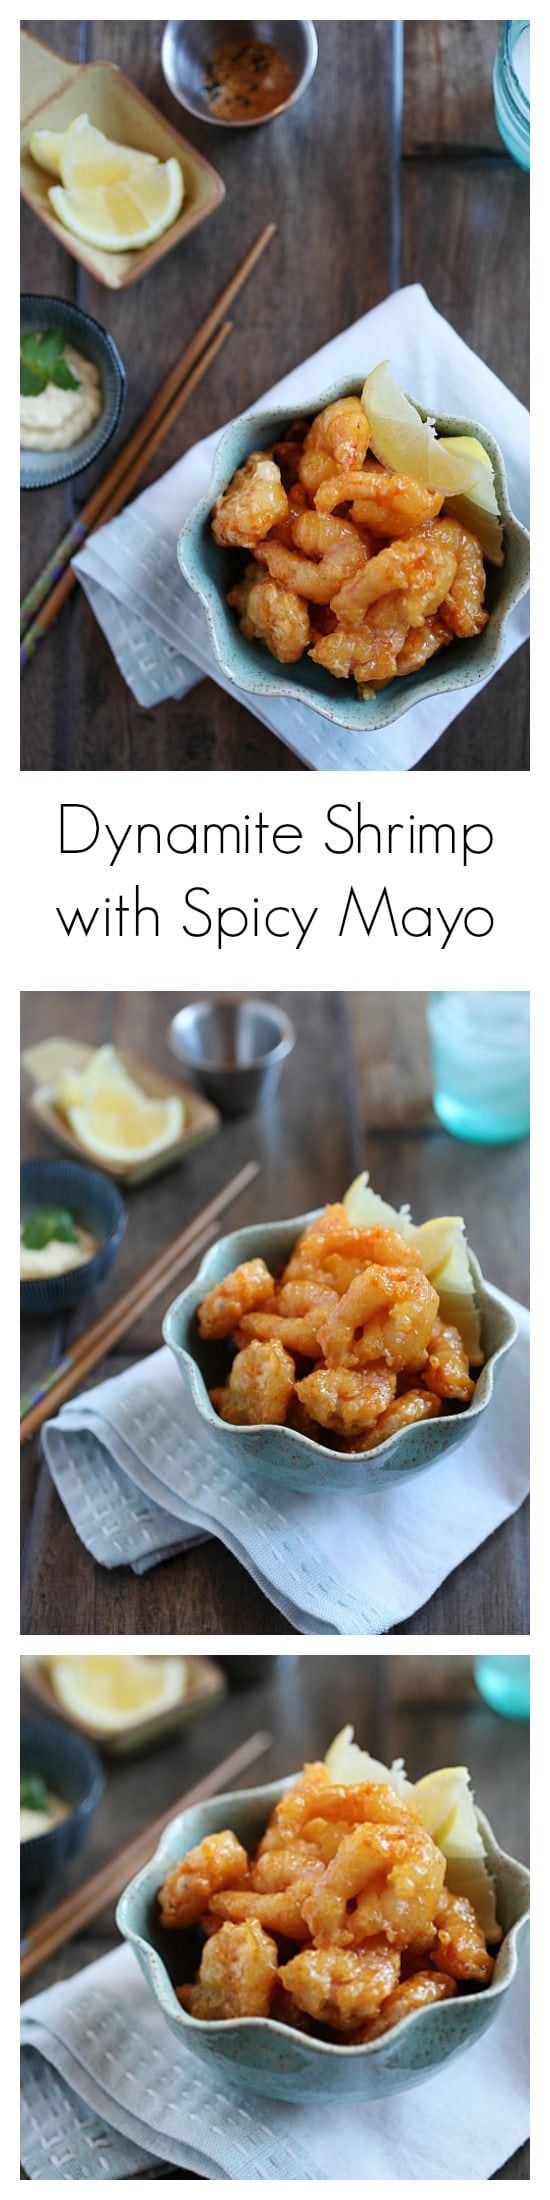 Dynamite Shrimp, crispy shrimp coated with rich creamy Sriracha mayo just like your favorite Japanese restaurant. Super delicious but very easy to make at home | rasamalaysia.com